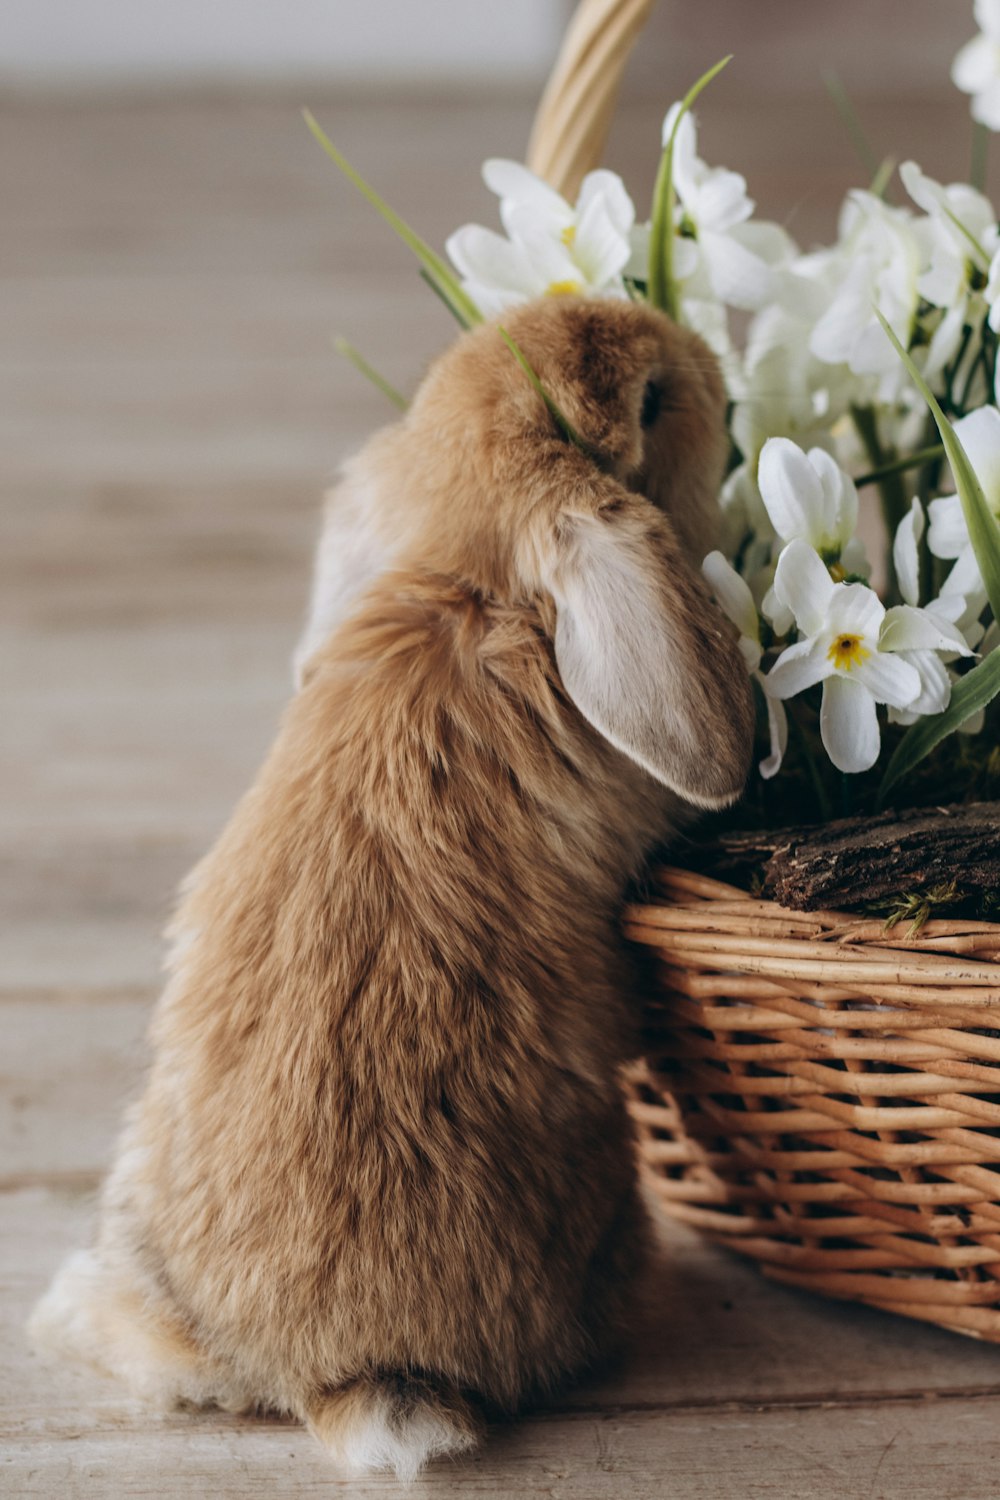 a small bunny sitting next to a basket of flowers